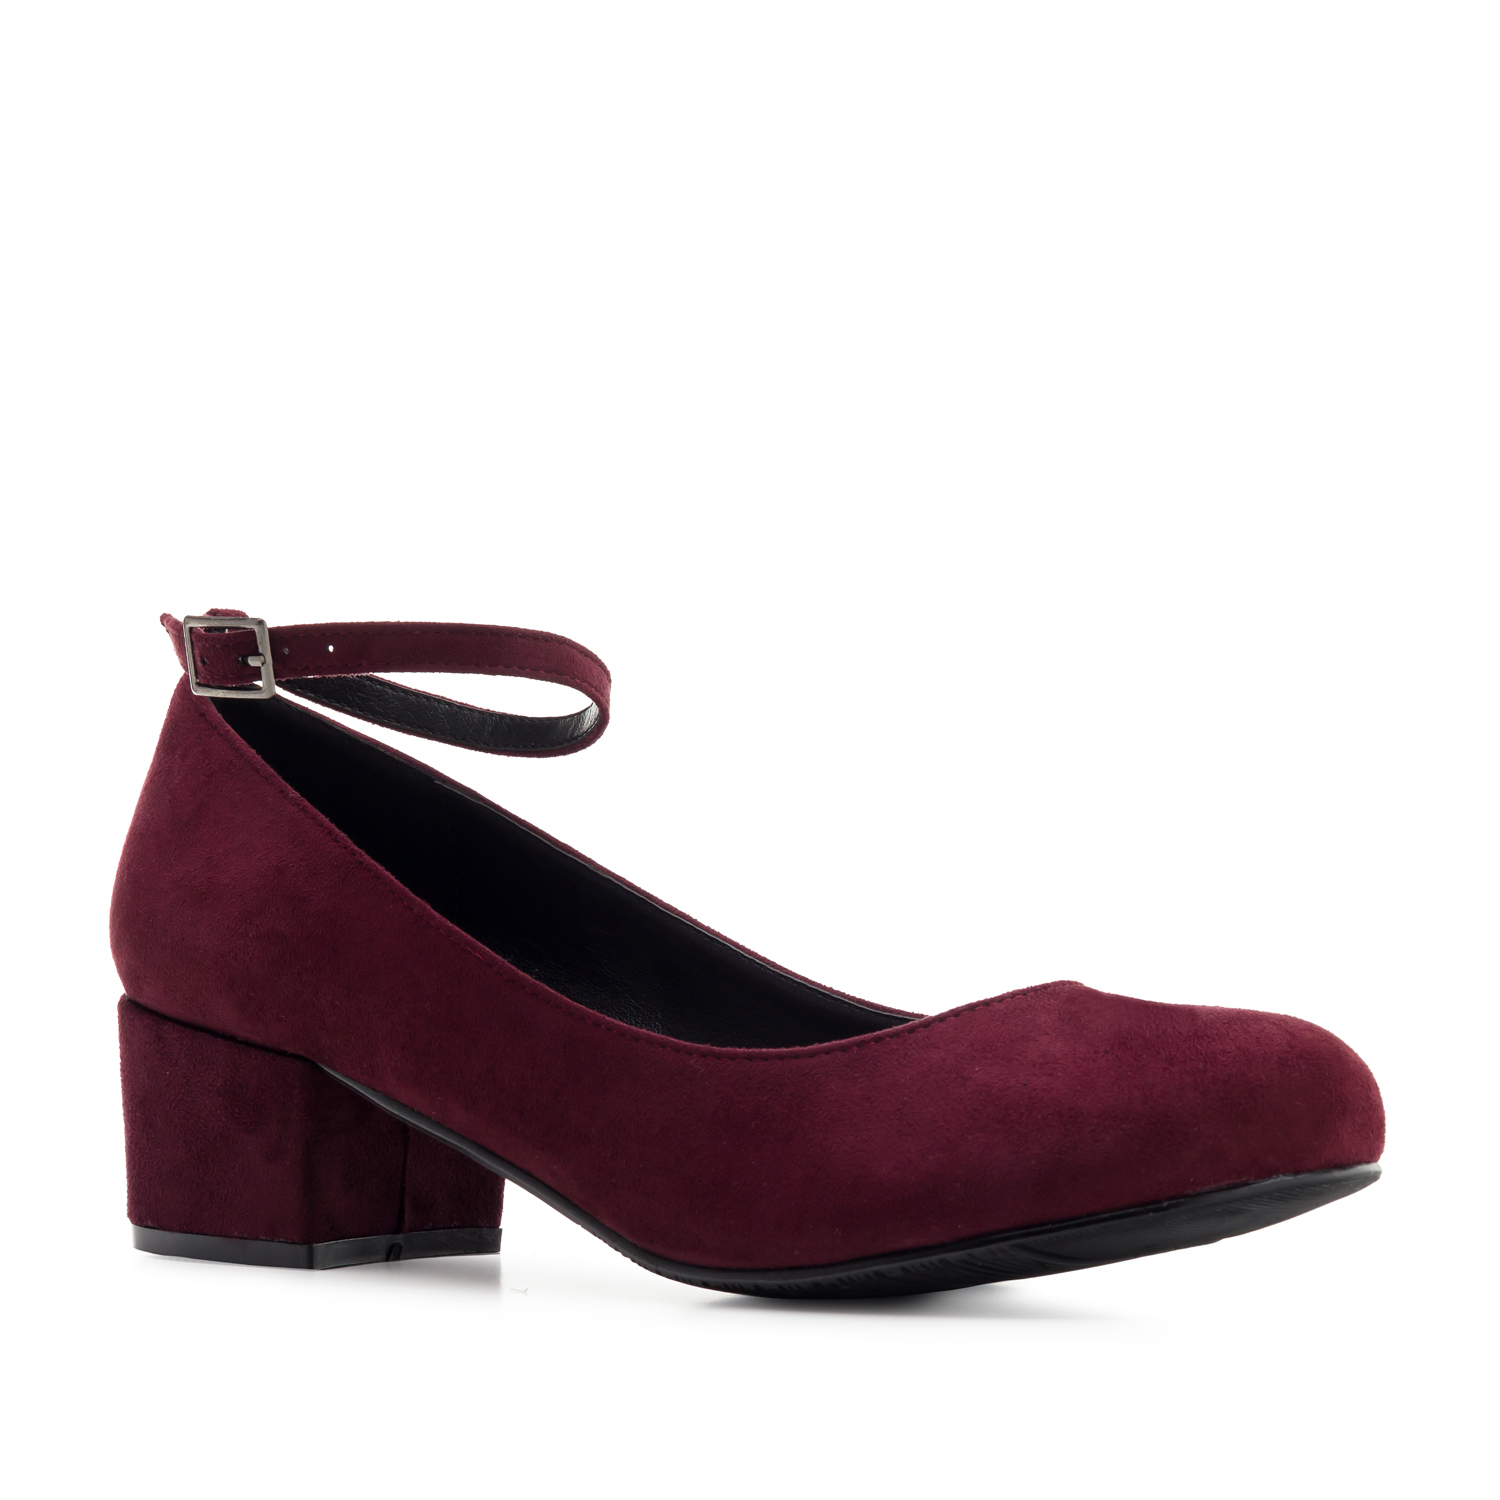 Ankle-Tie Shoes in Burgundy Suede - Women, Large Sizes, Women, Petite ...